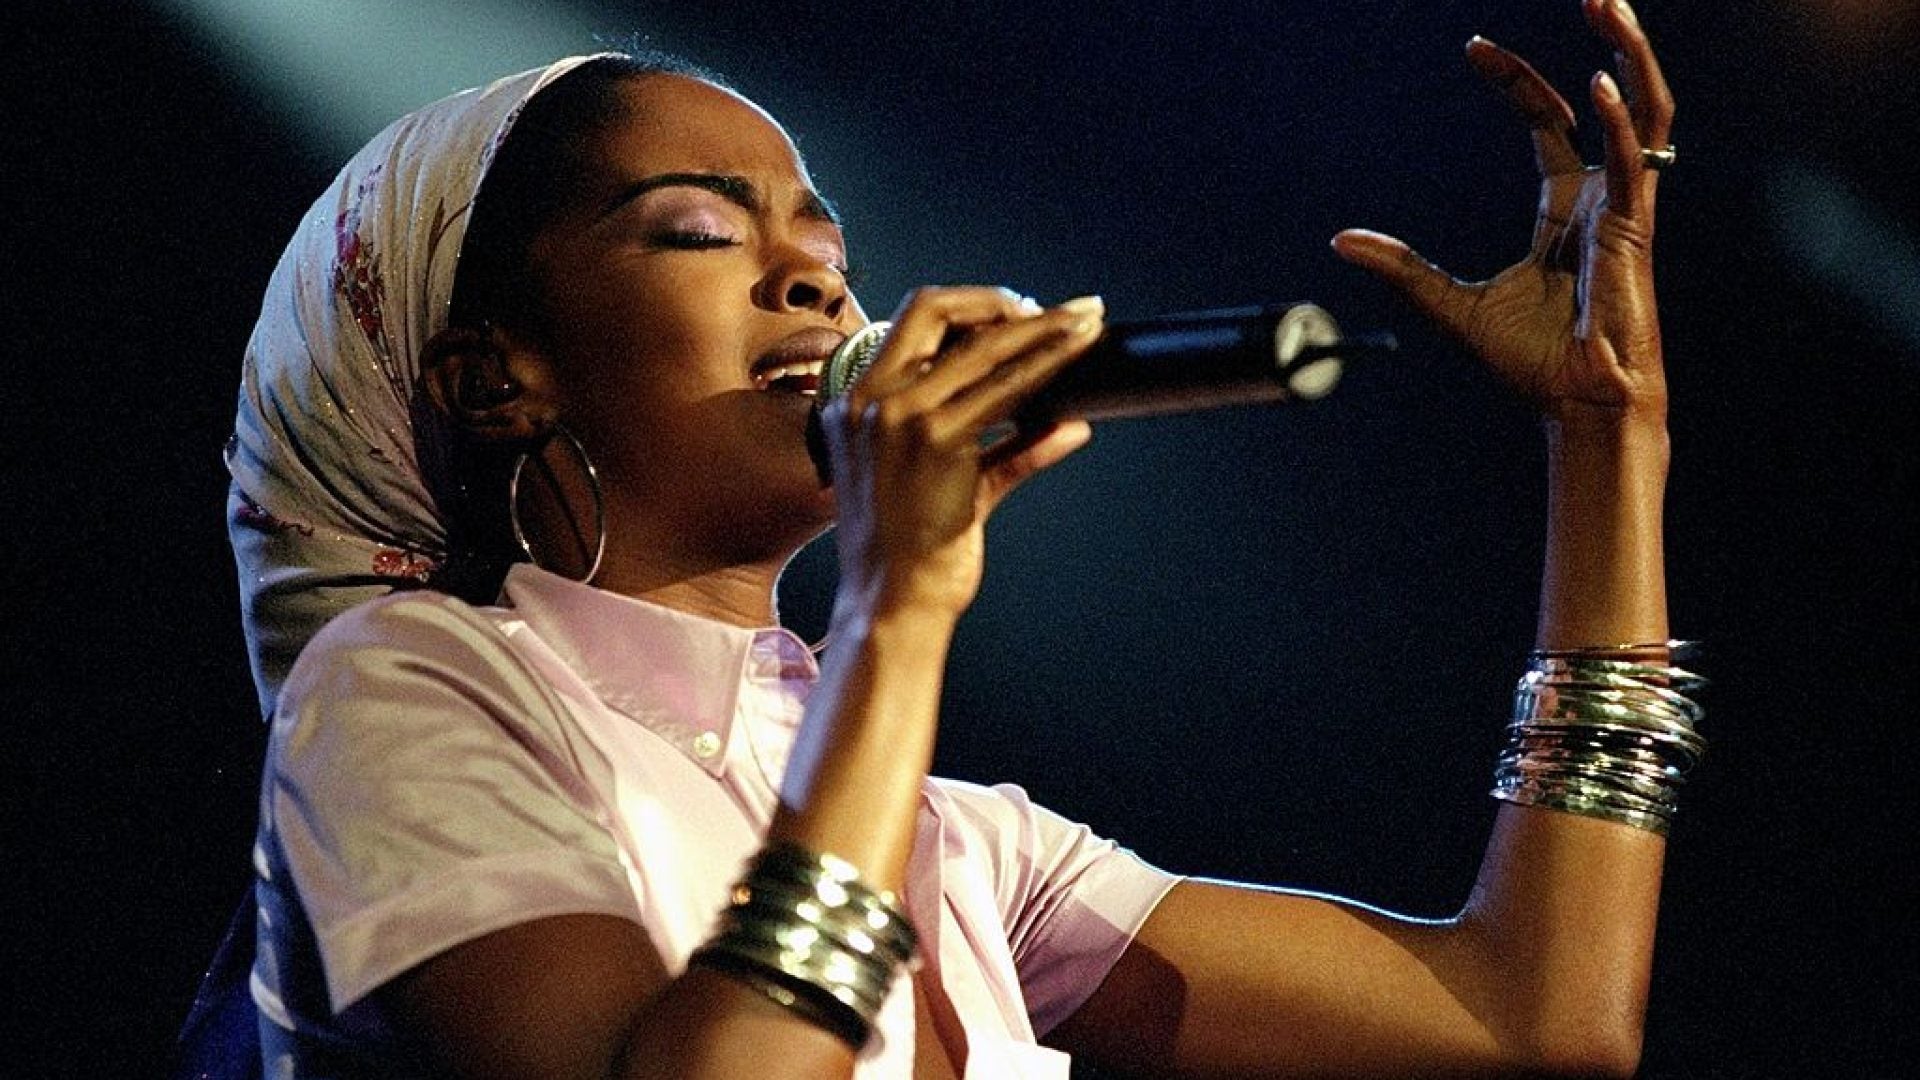 Lauryn Hill Released The Iconic "The Miseducation Of Lauryn Hill" 25 Years Ago. Here's What You Probably Didn't Know About Her Debut Solo Album